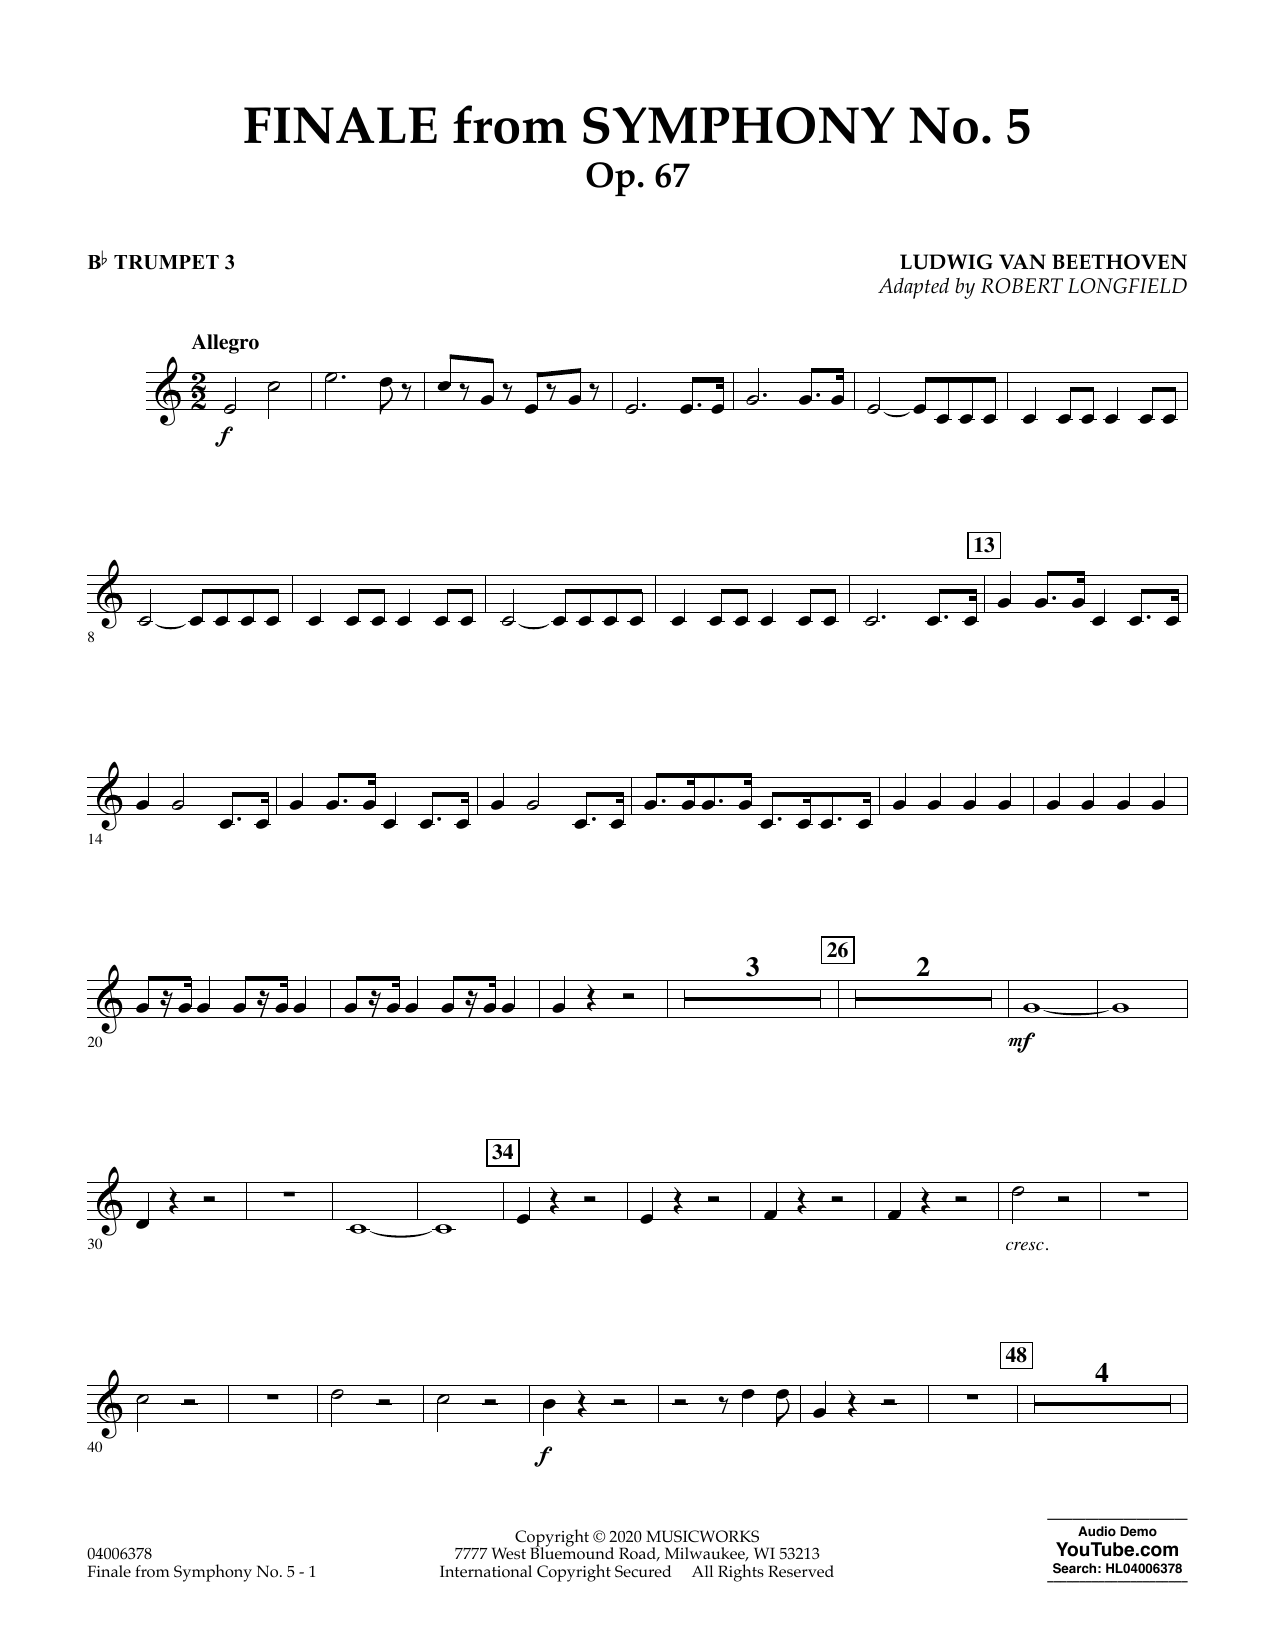 Ludwig van Beethoven Finale from Symphony No. 5 (arr. Robert Longfield) - Bb Trumpet 3 sheet music preview music notes and score for Concert Band including 3 page(s)